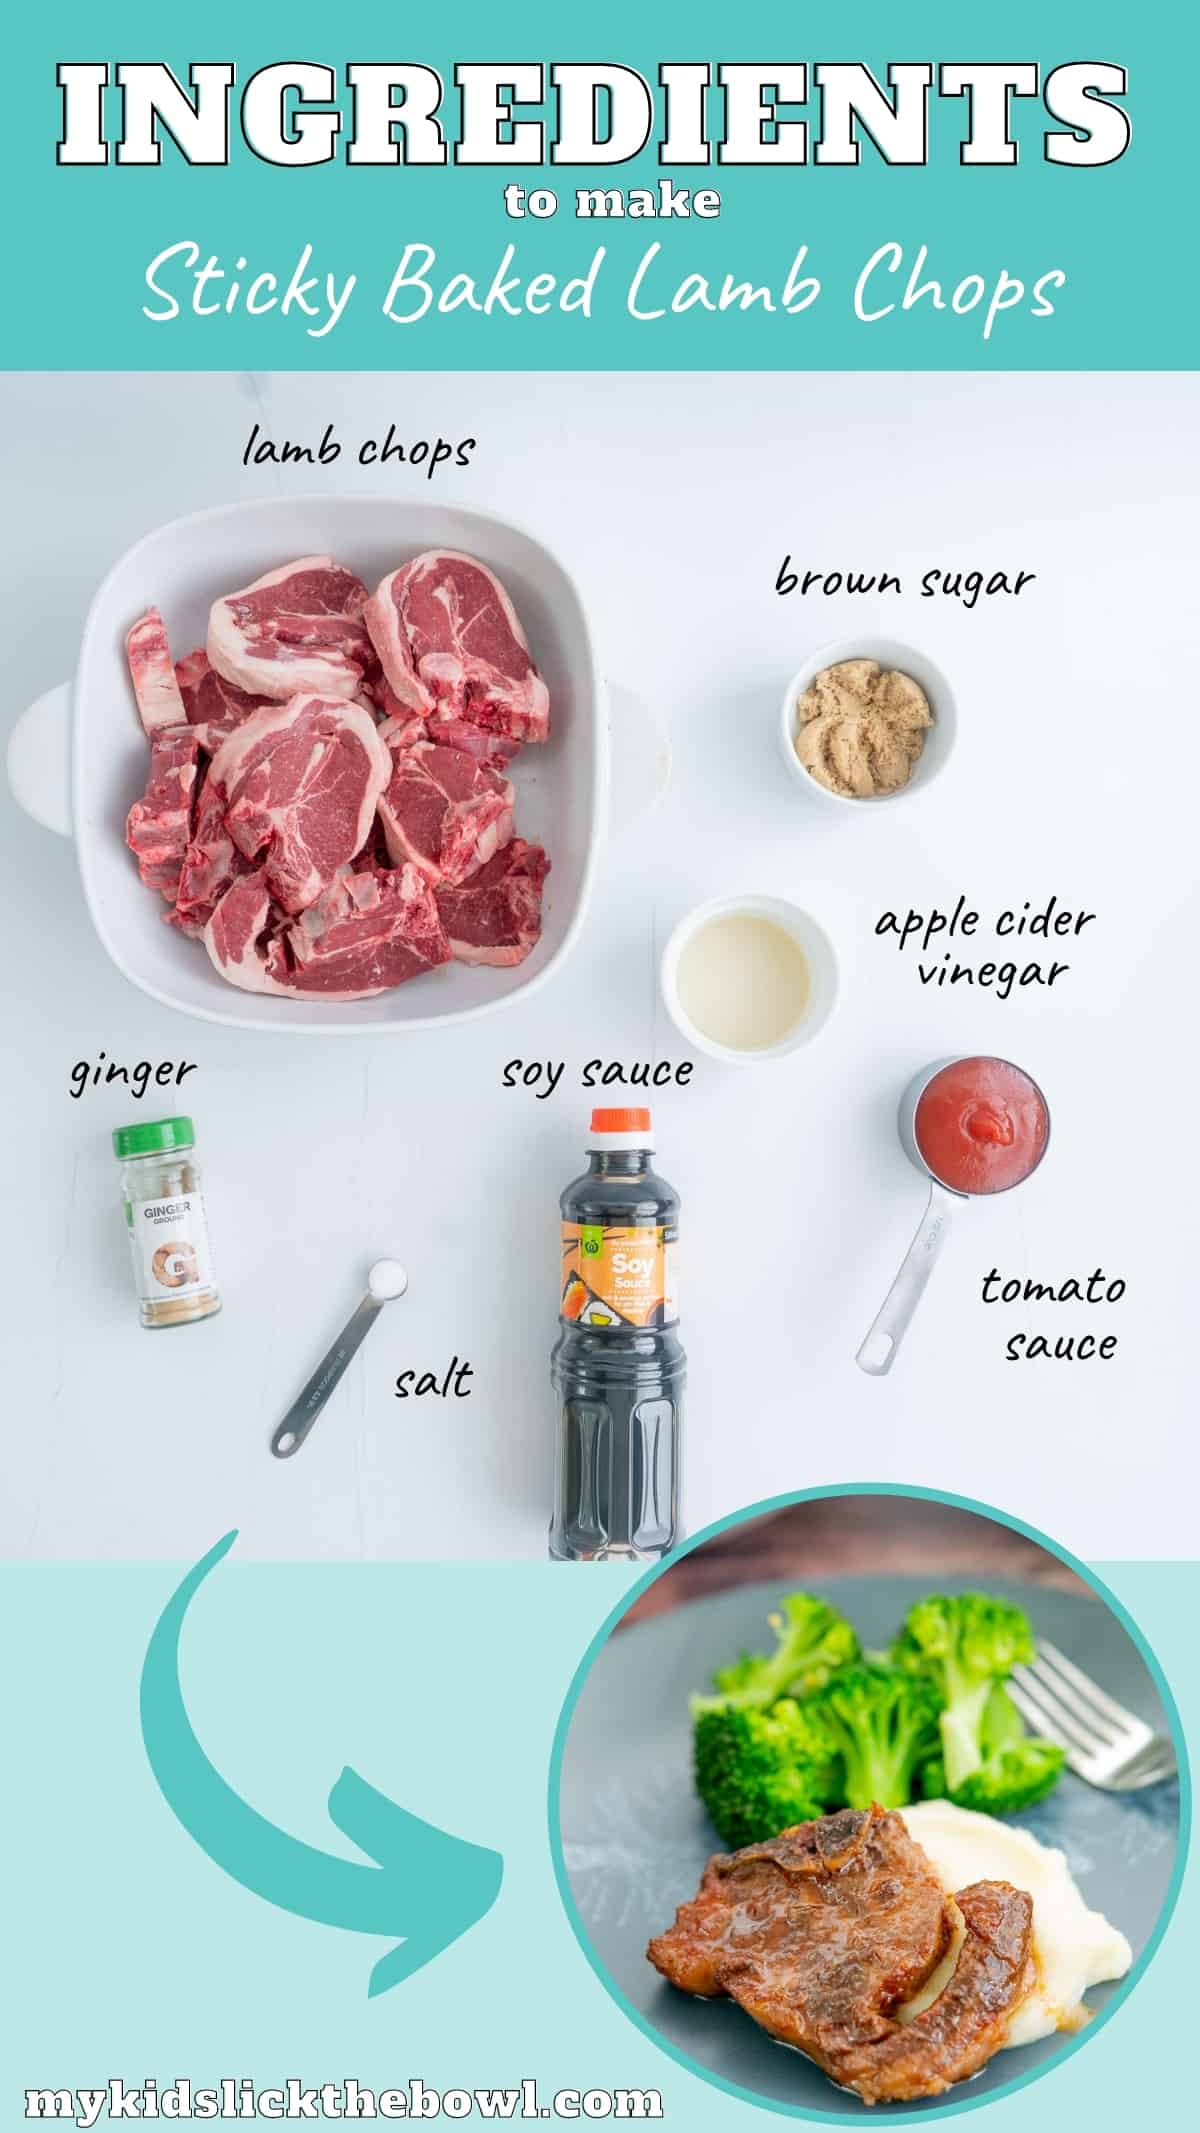 The ingredients to make oven baked lamb chops laid out on a counter top with text overlay.